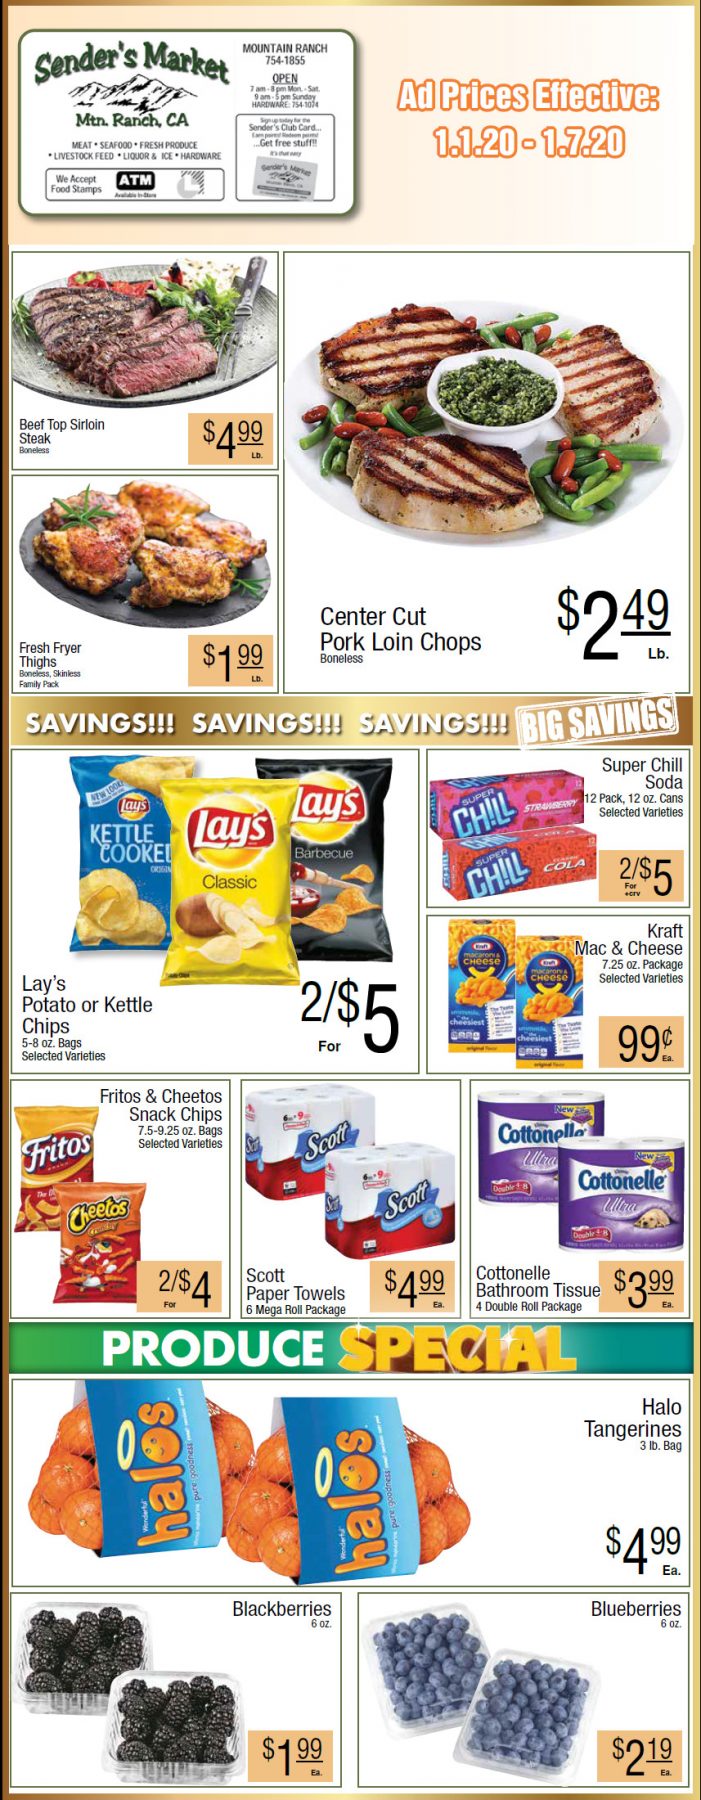 Sender’s Market’s Grocery Ad & Grocery Specials Through January 7th